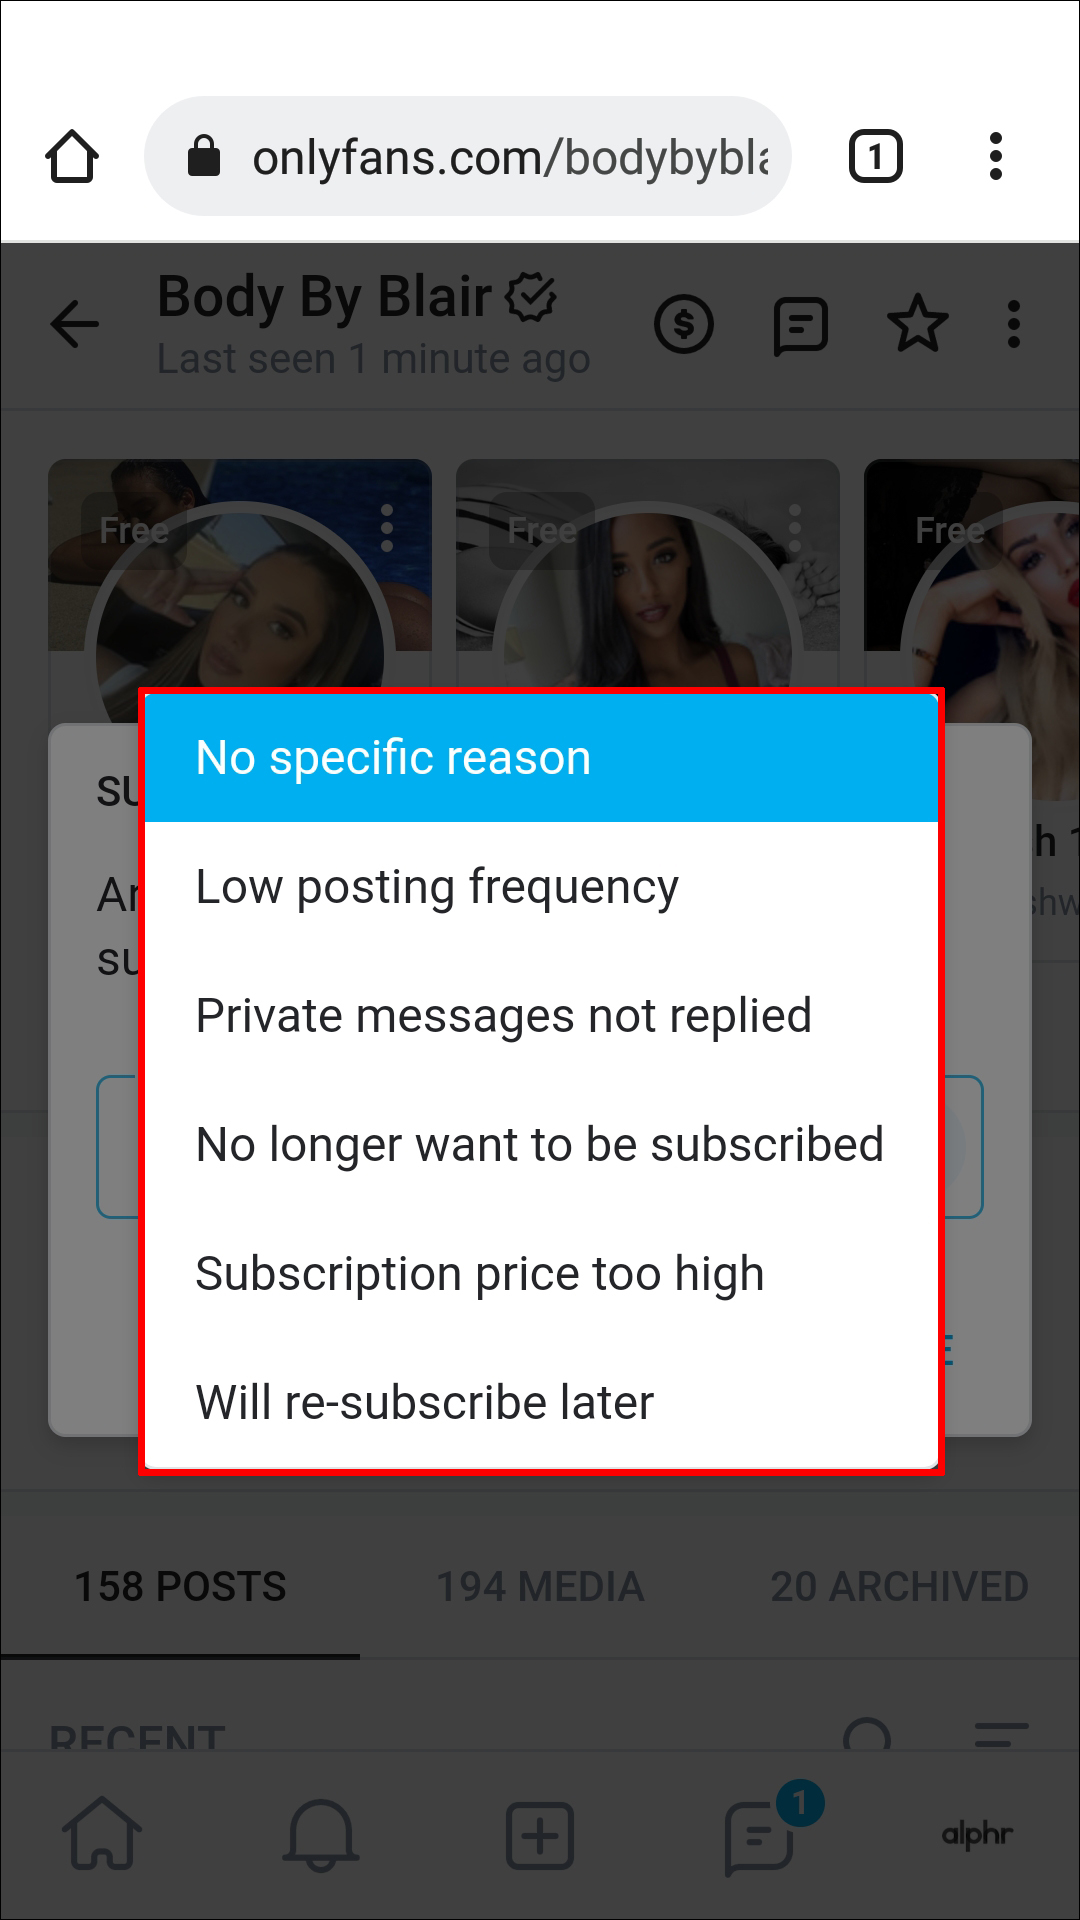 How to cancel subscriptions on onlyfans